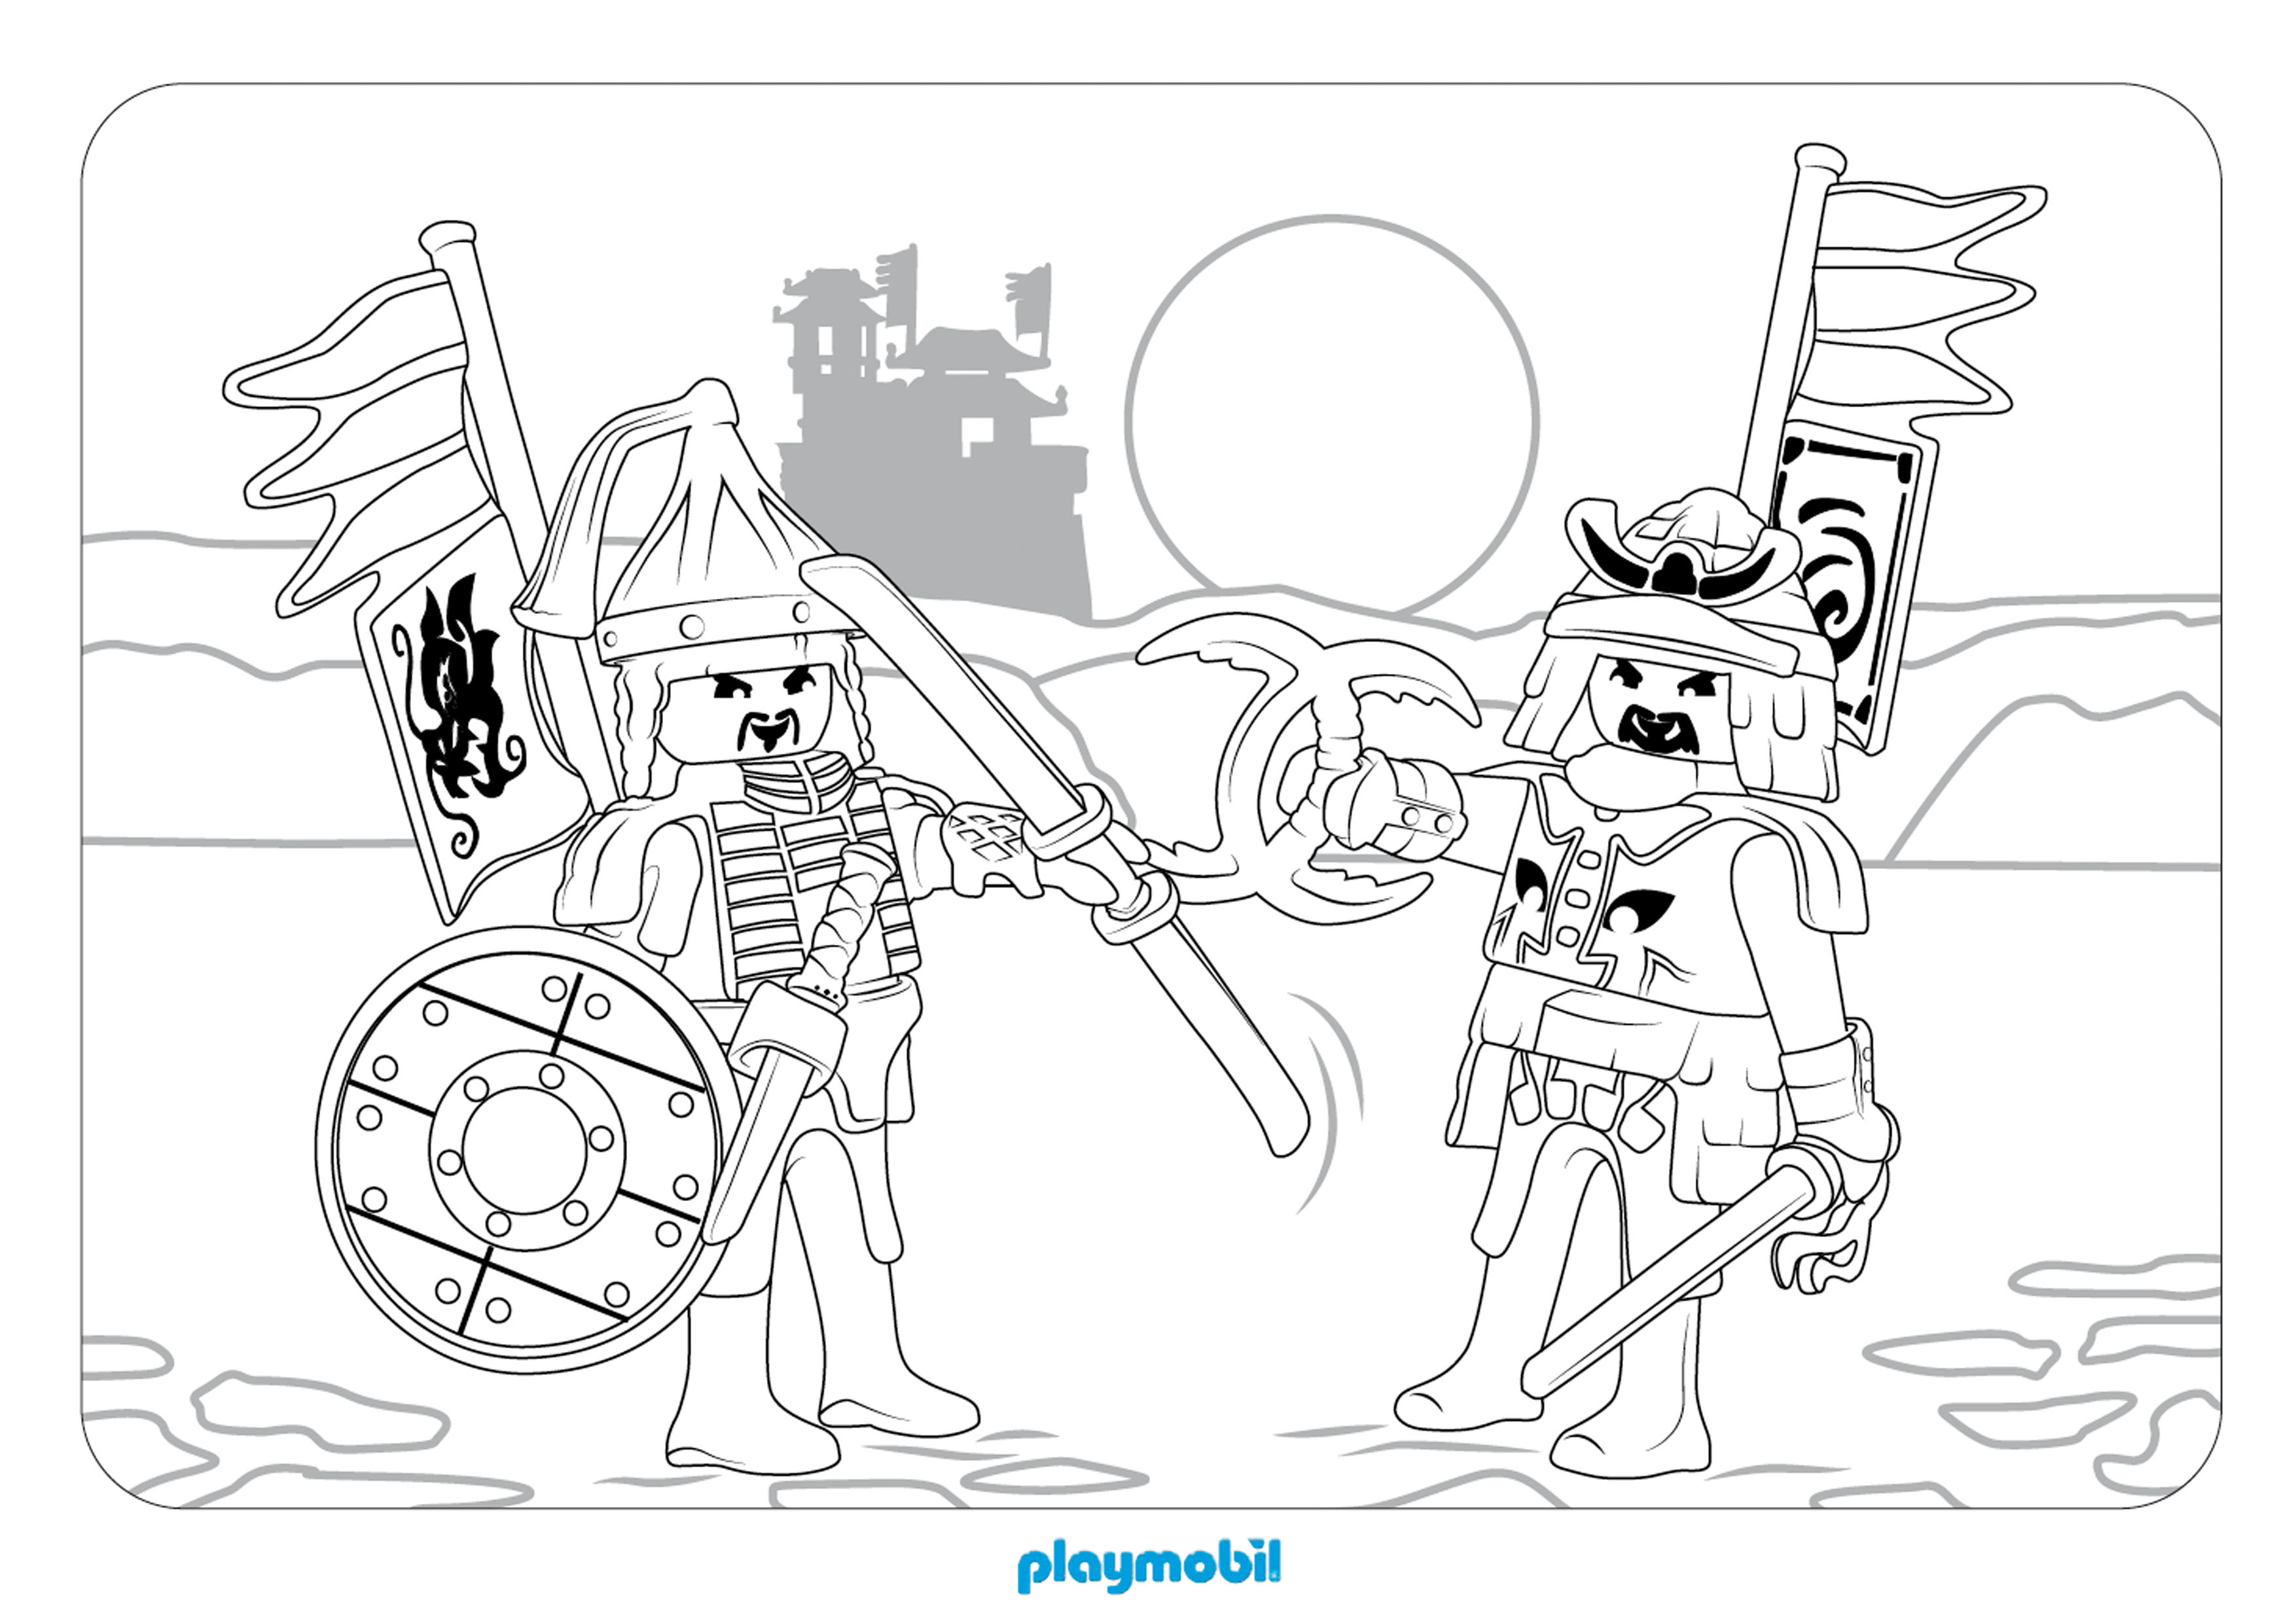 Playmobil Coloring Pages - Best Coloring Pages For Kids